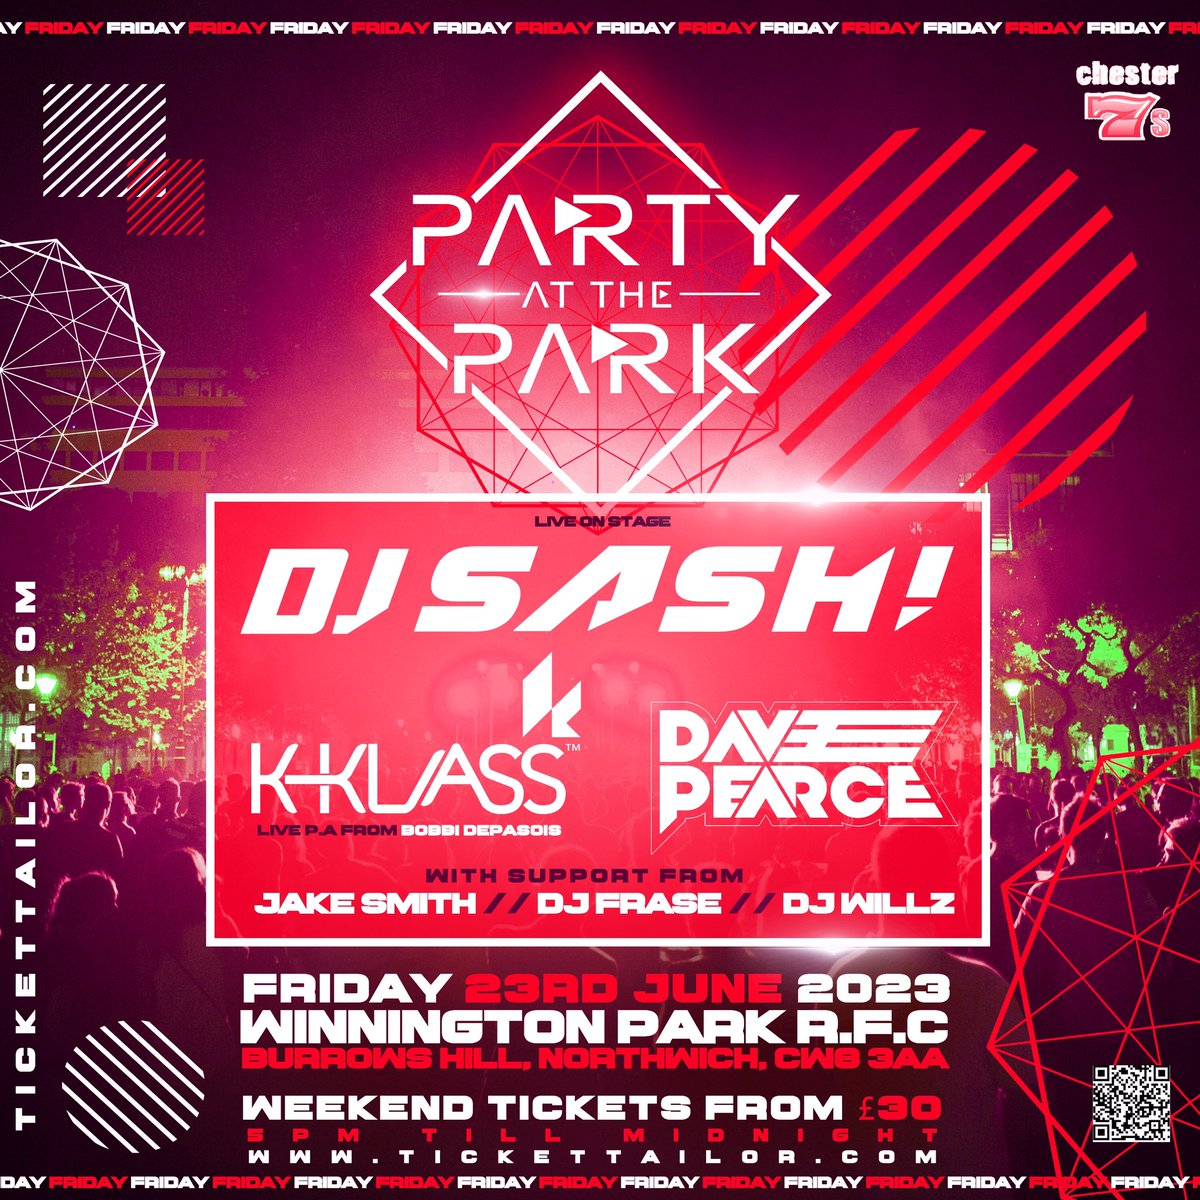 Massive after parties this year guys …. What do we think ??? buytickets.at/tkevents/731014